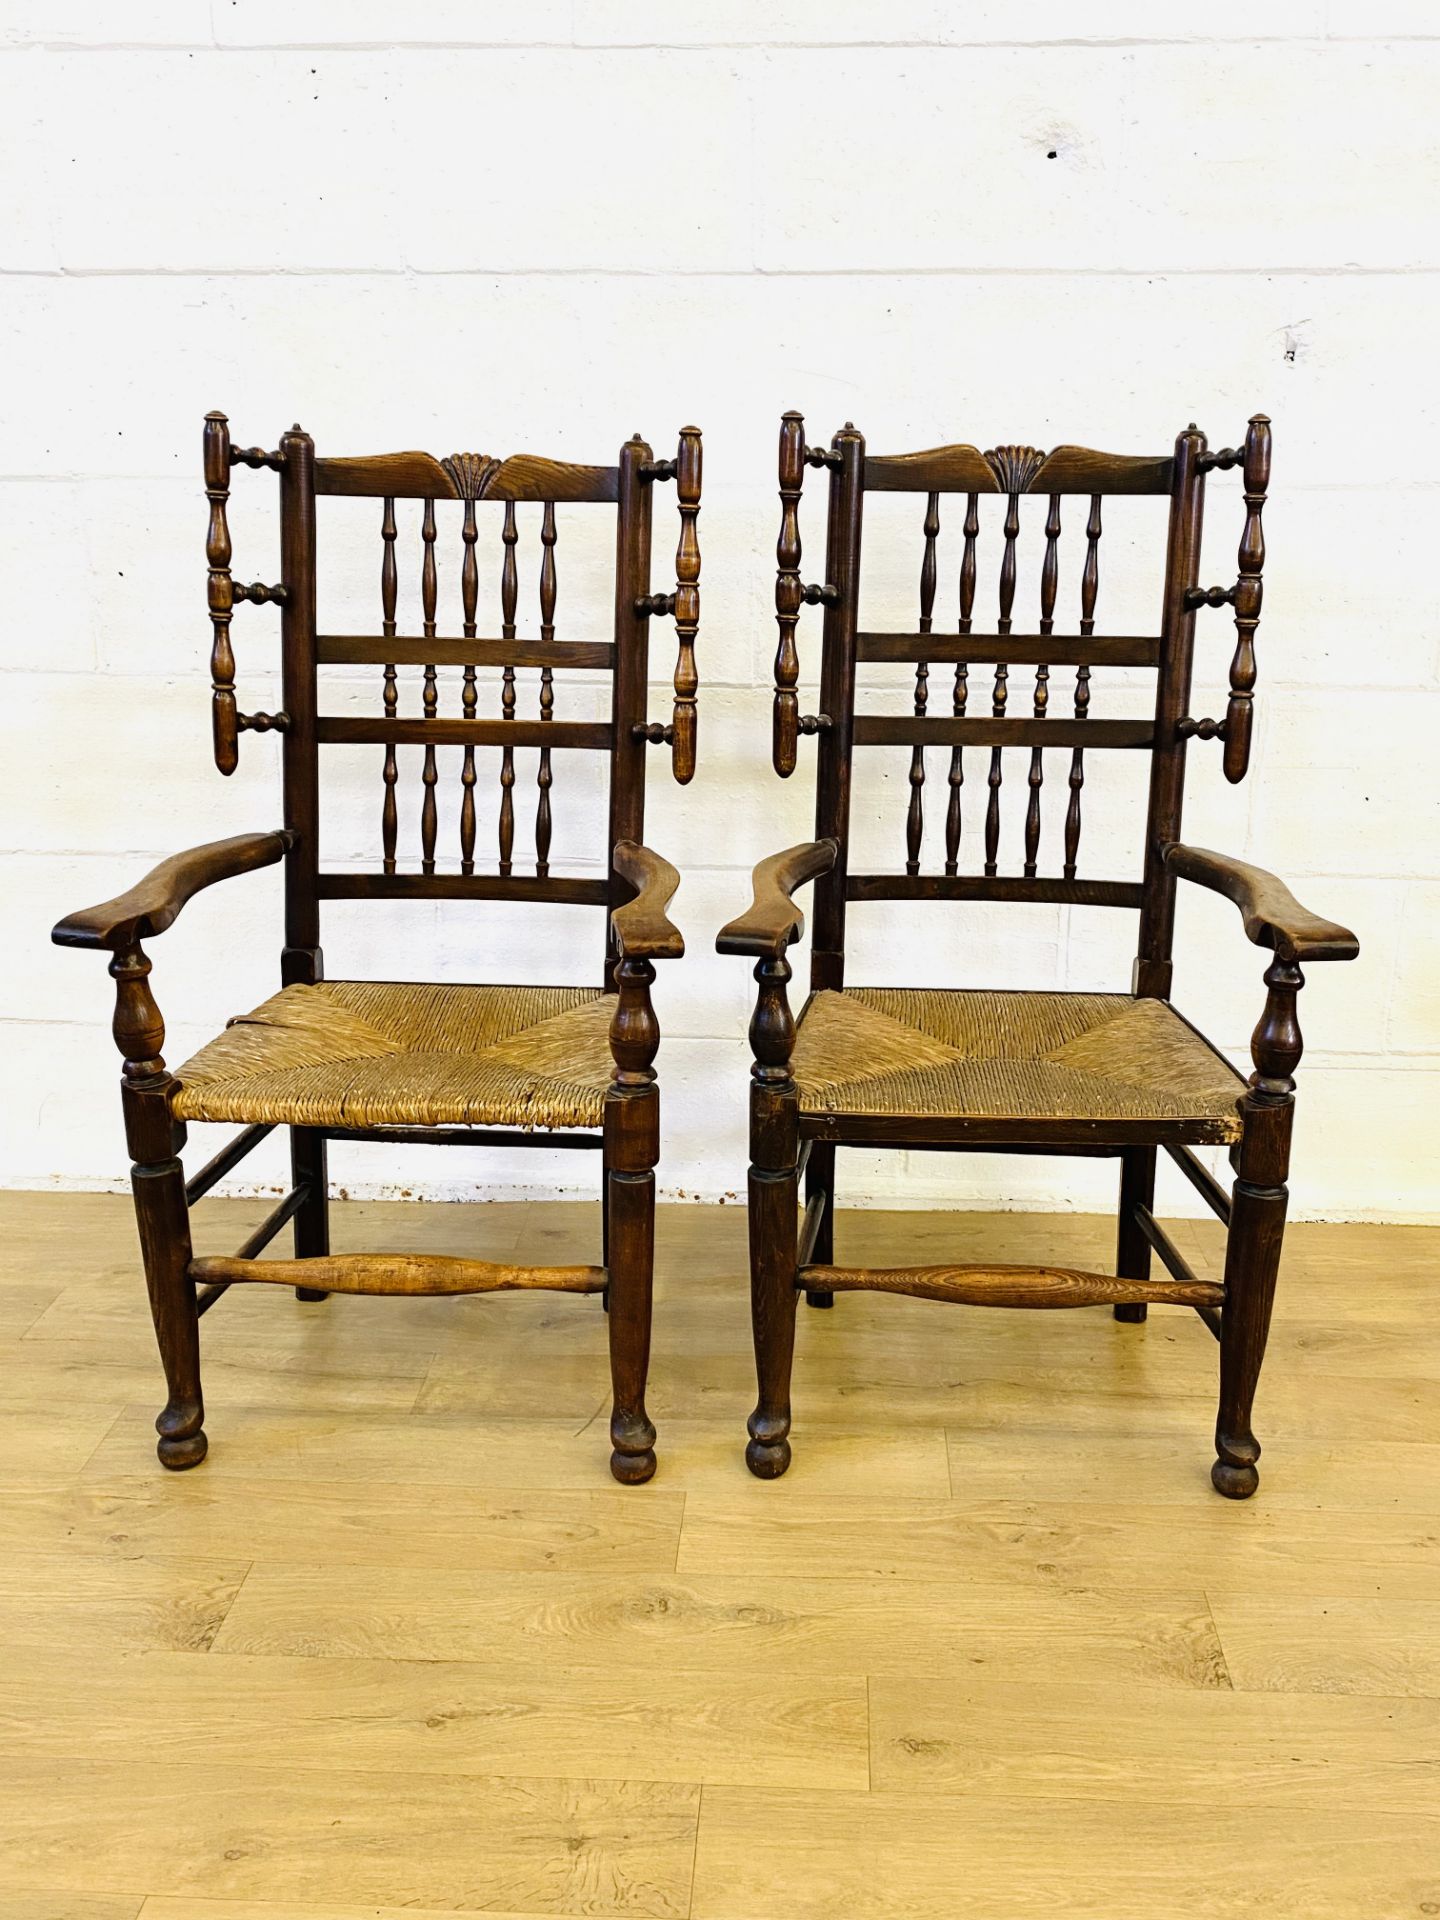 Pair of oak arts and crafts style armchairs - Image 7 of 7